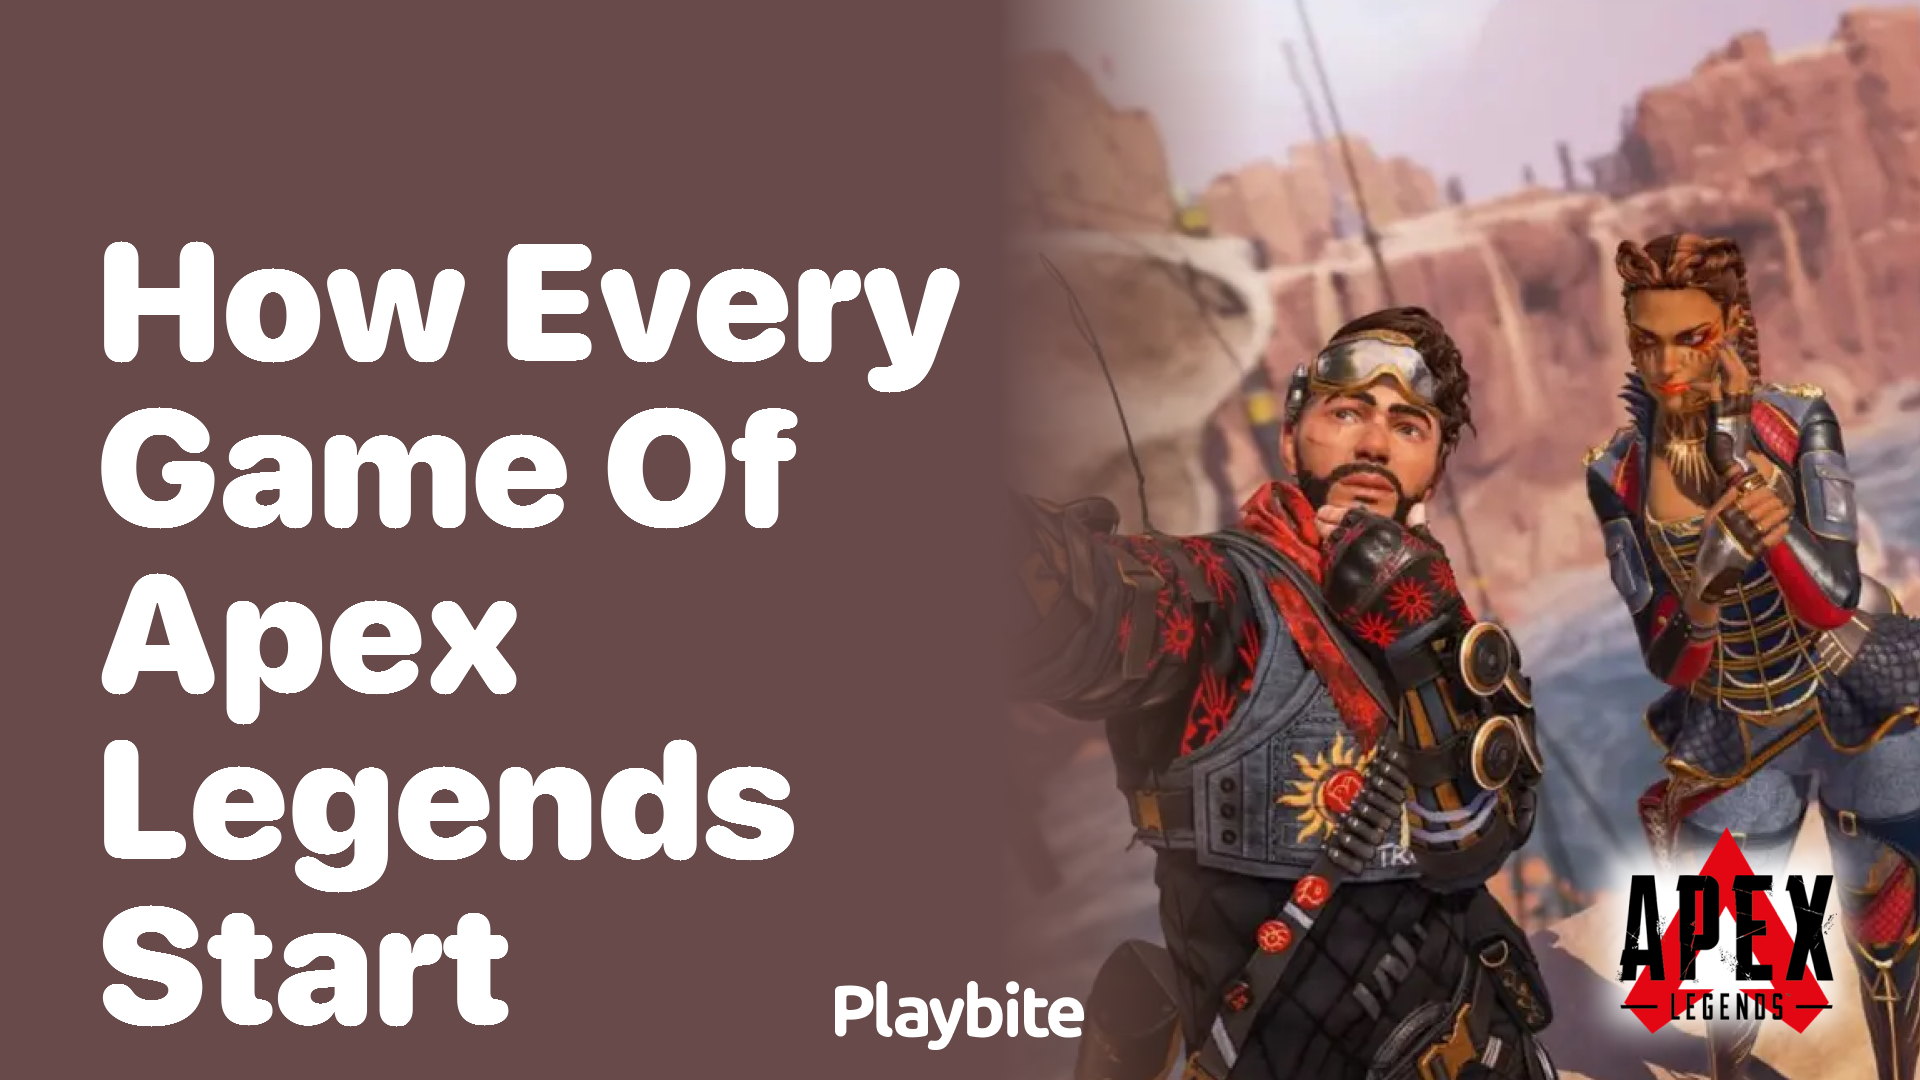 How does every game of Apex Legends start?